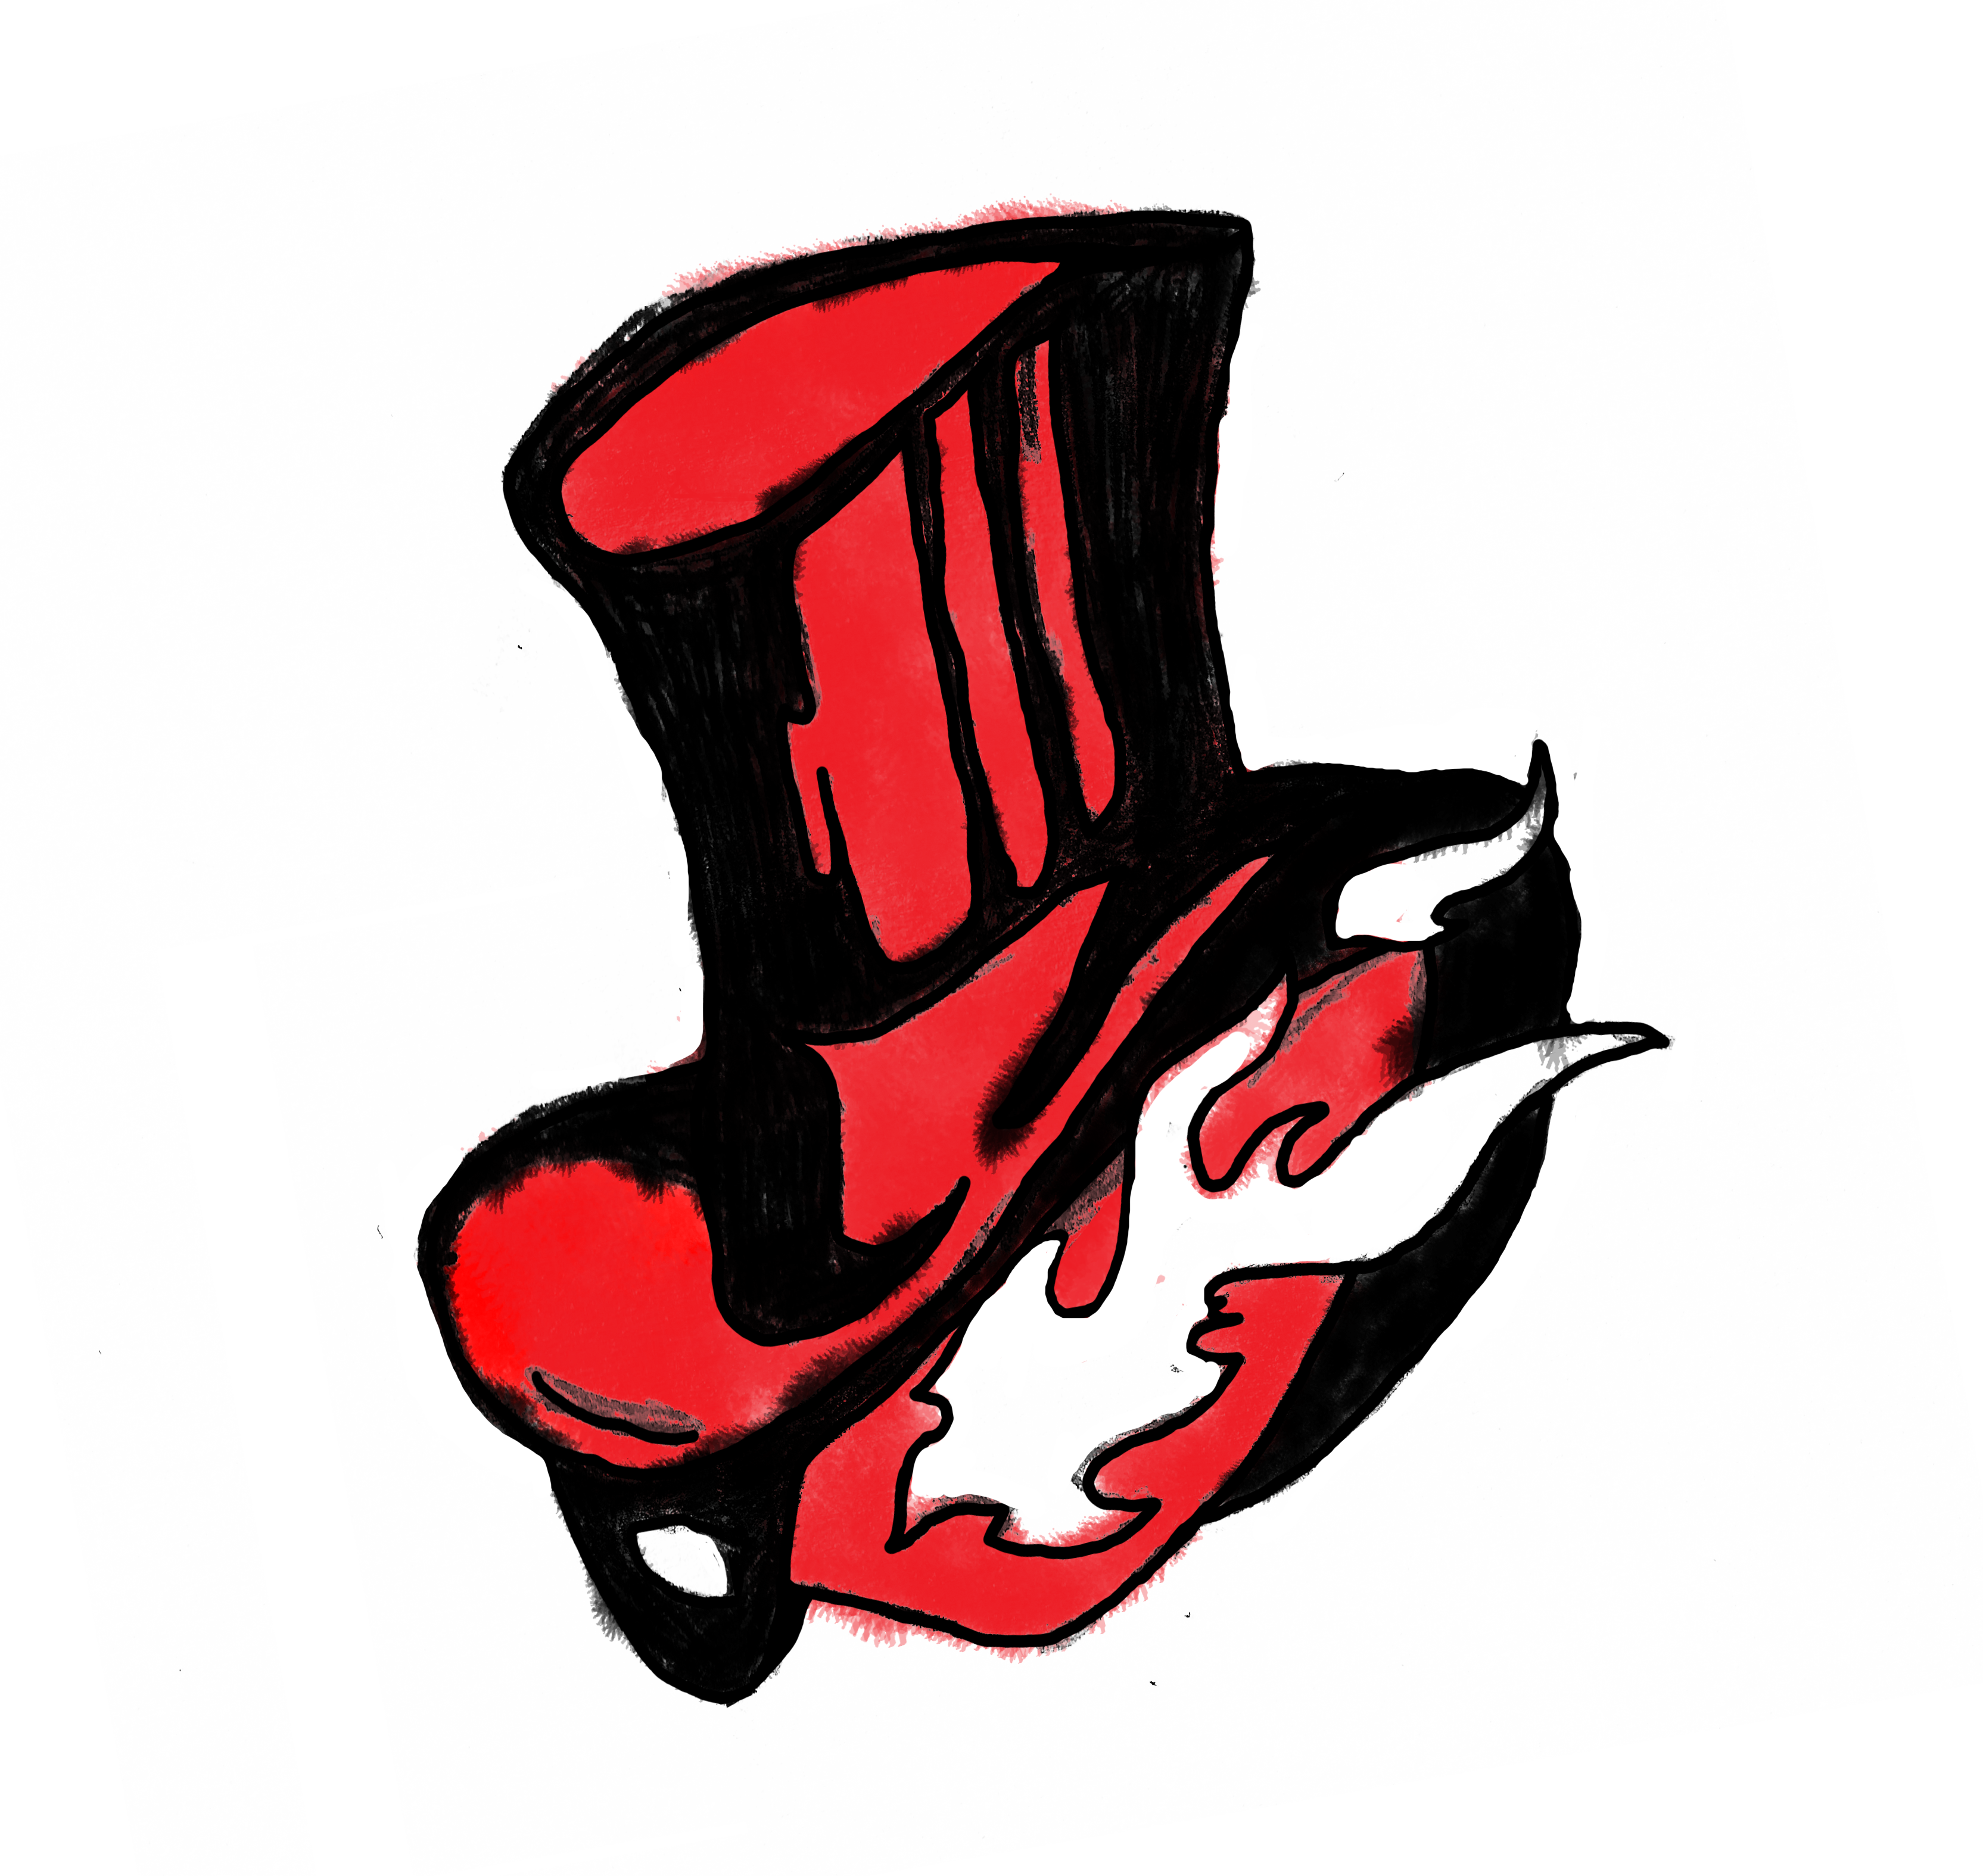 Persona 5] I tried drawing the Phantom Thieves logo in my.